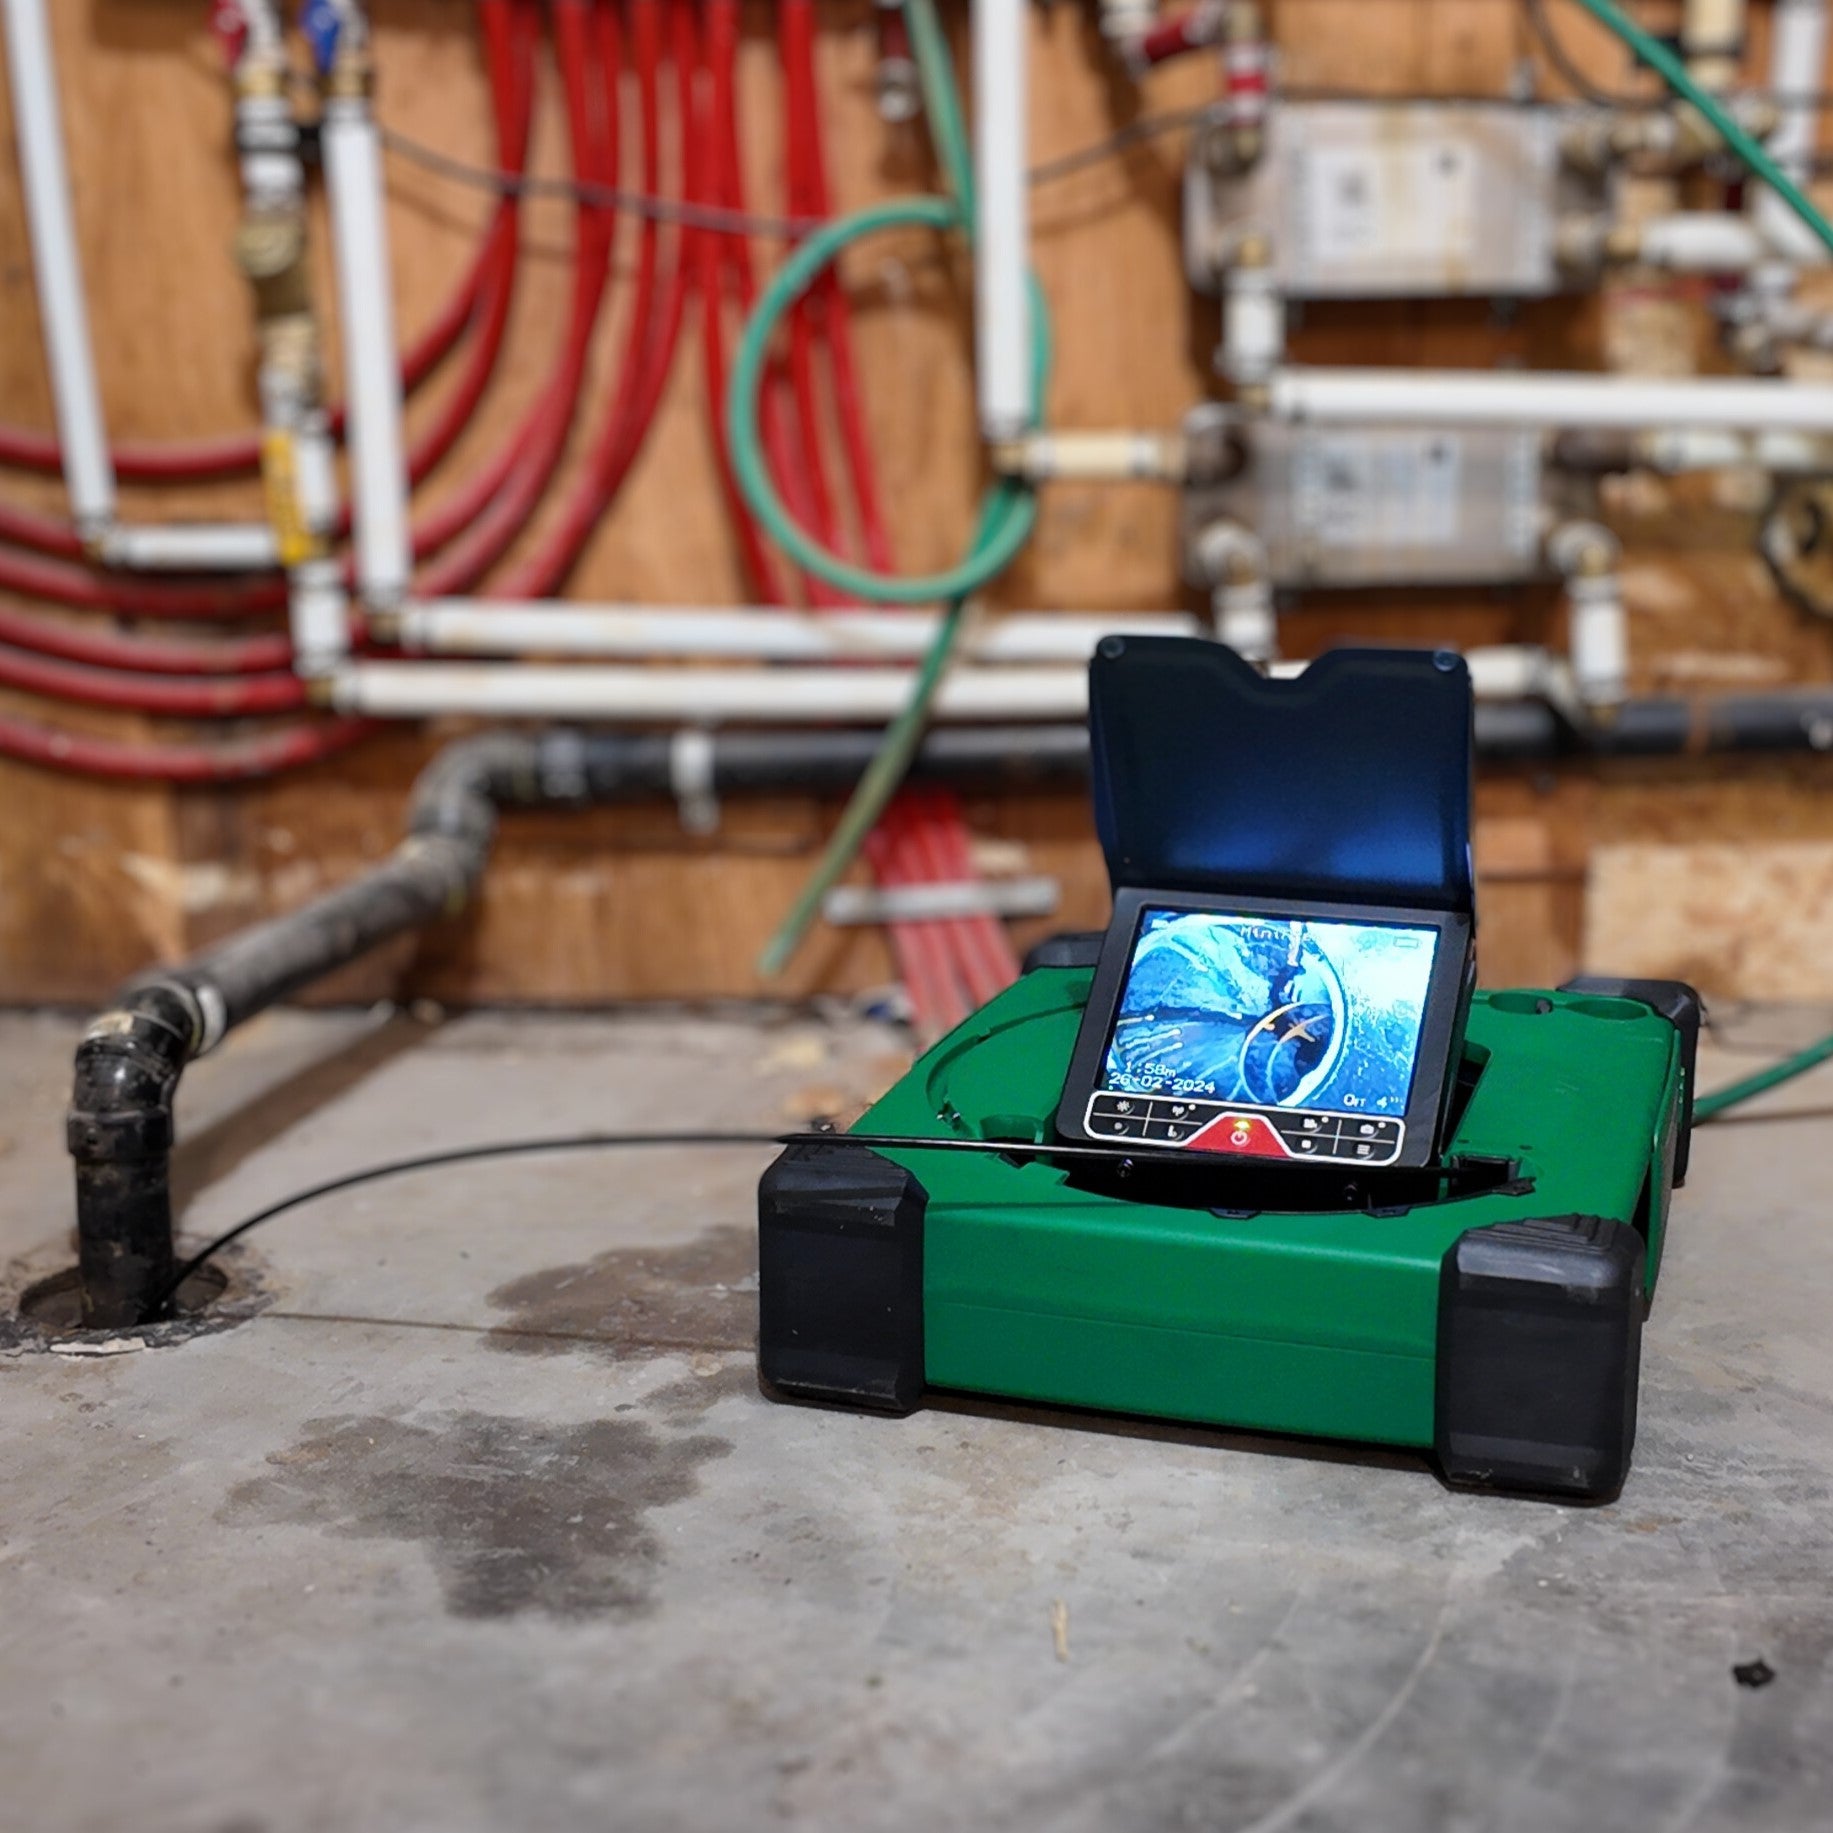 Sewer Pipe Inspection Camera from Camtronics